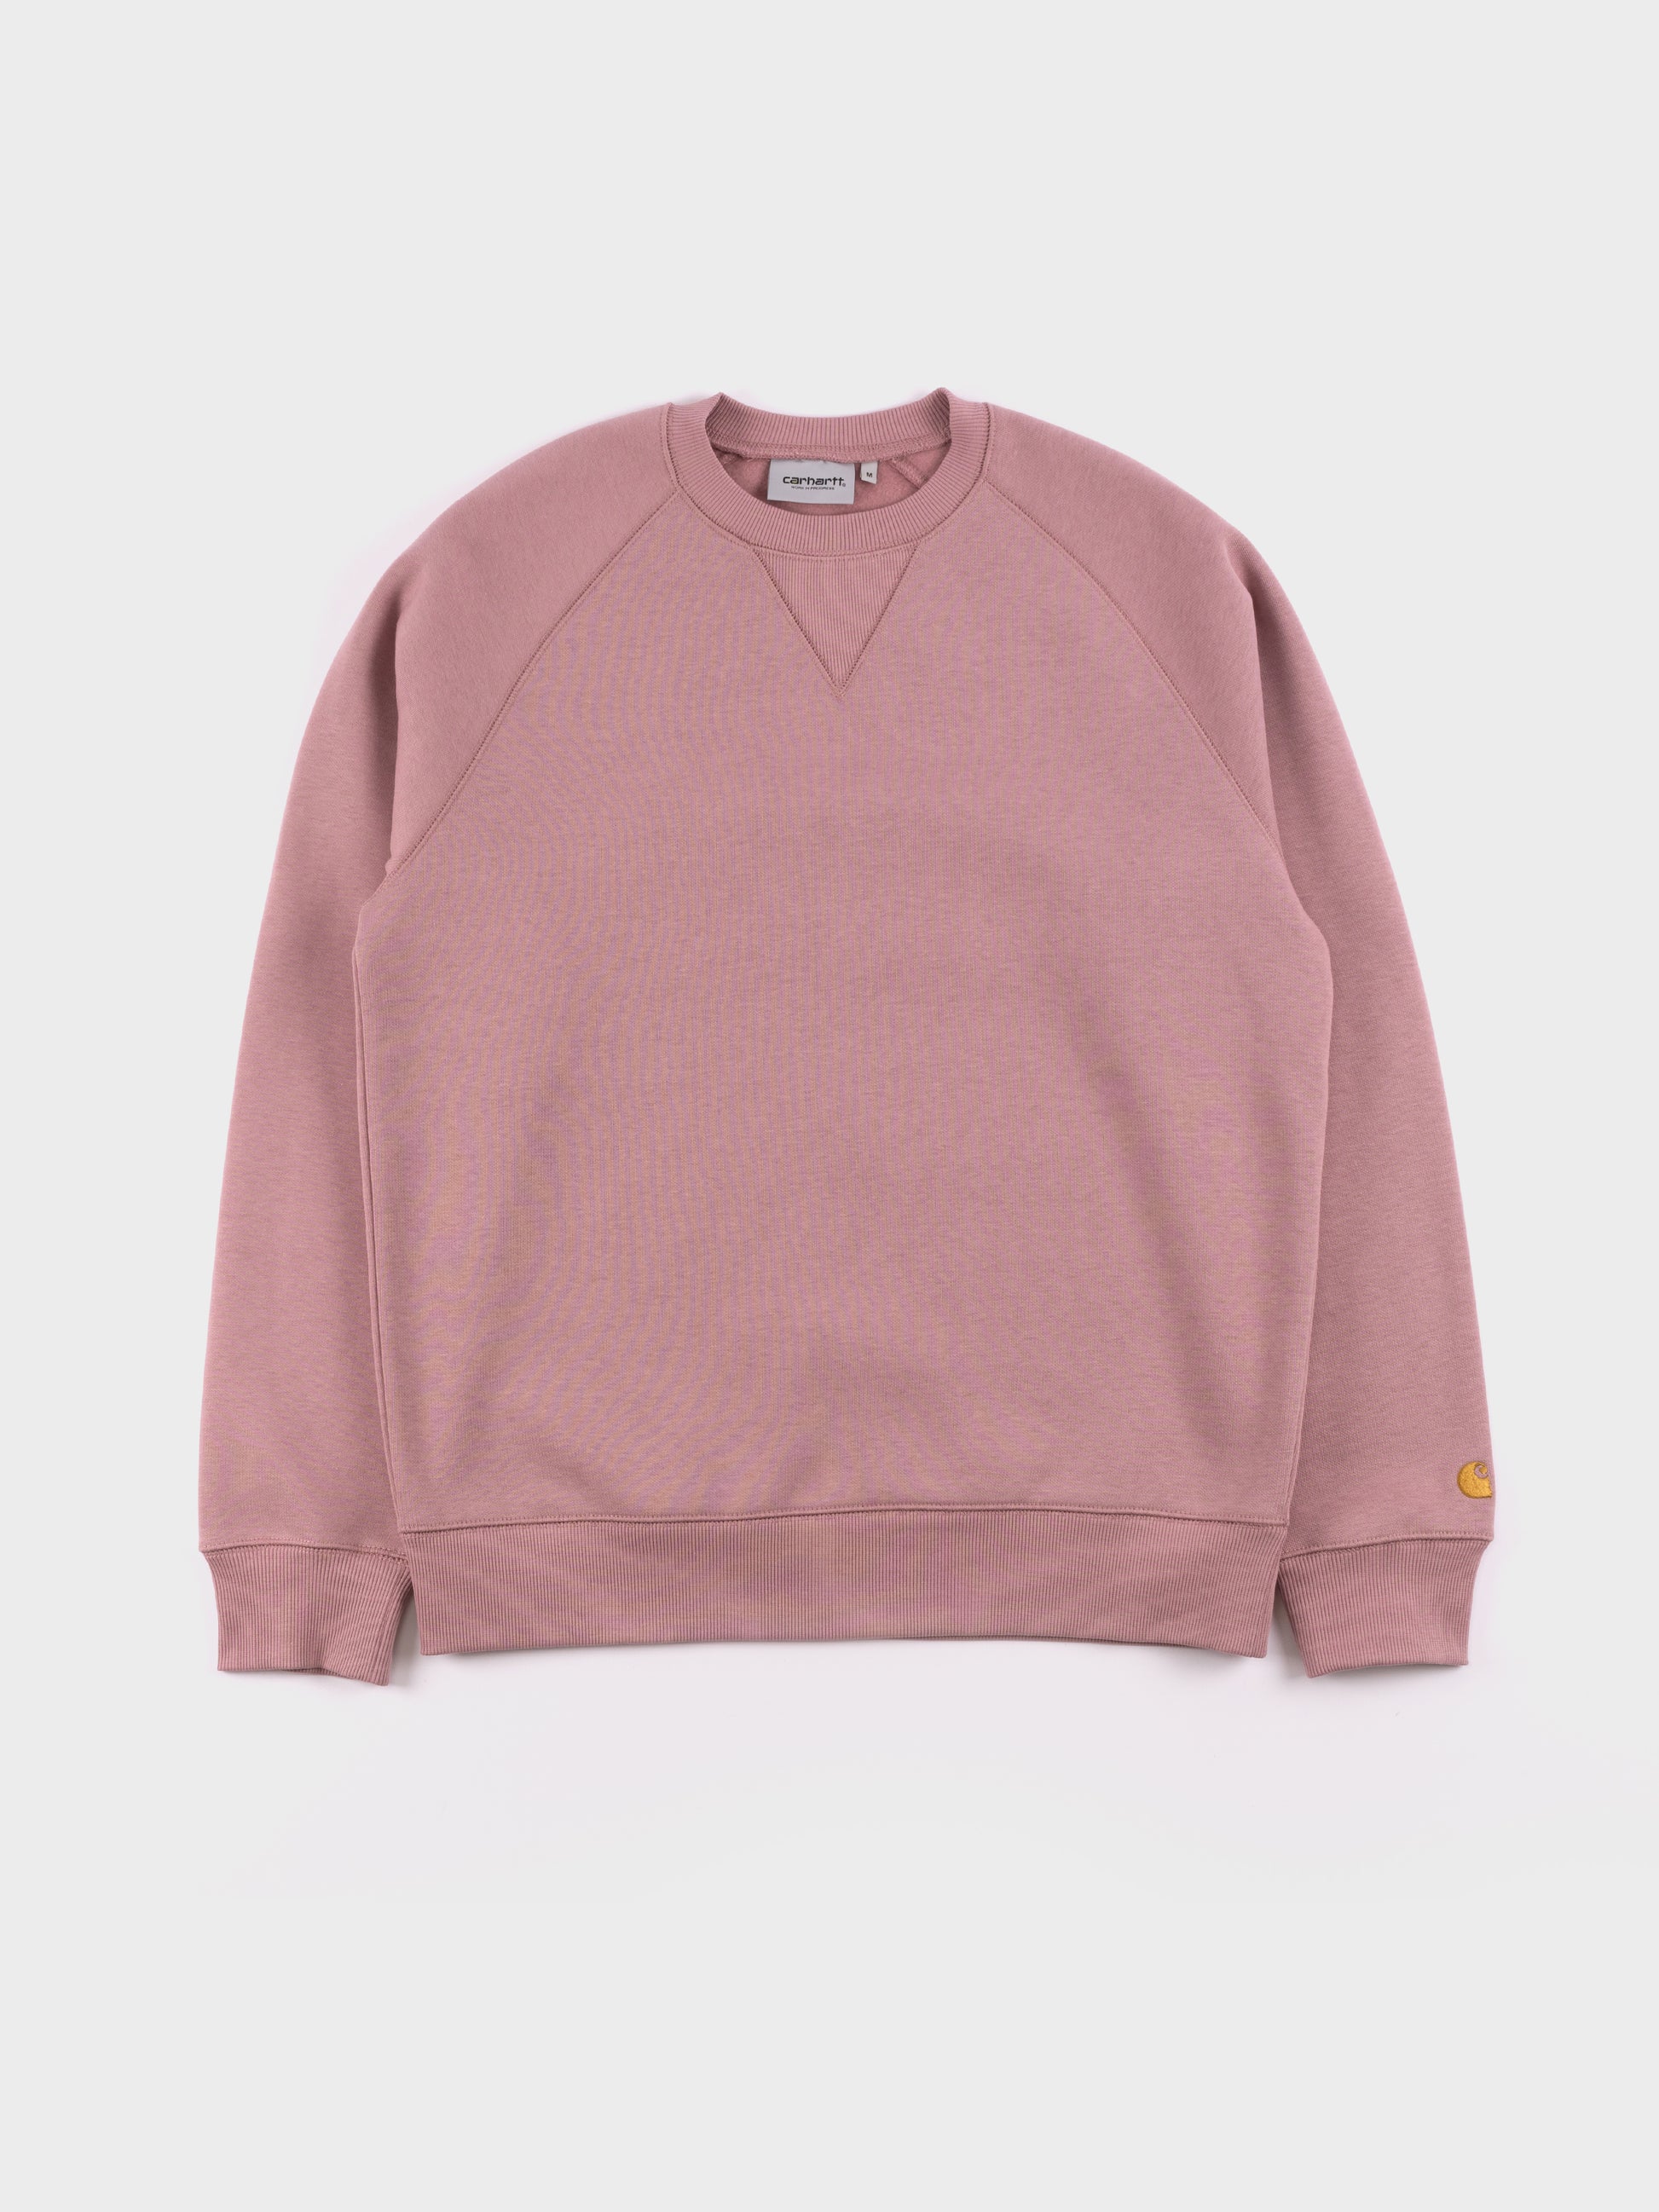 Carhartt Chase Sweat - Glassy Pink/Gold